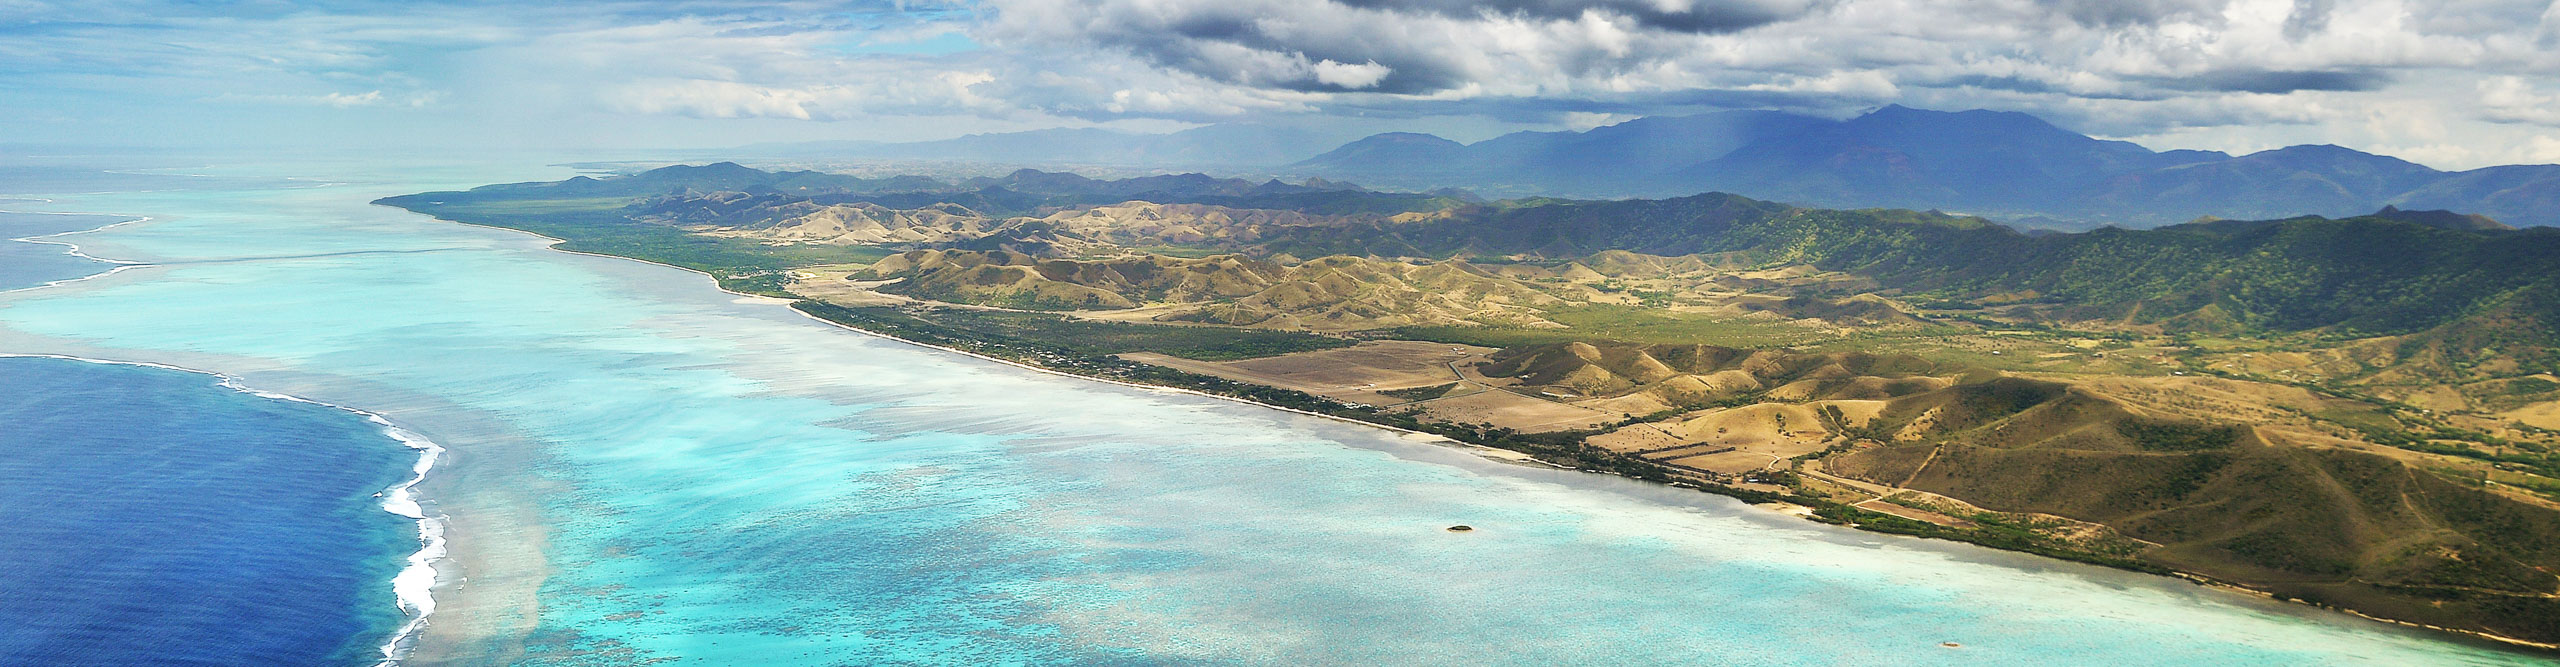 Aerial view of Deva Mountains and the Reef Lagoon at Poe in New Caledonia 